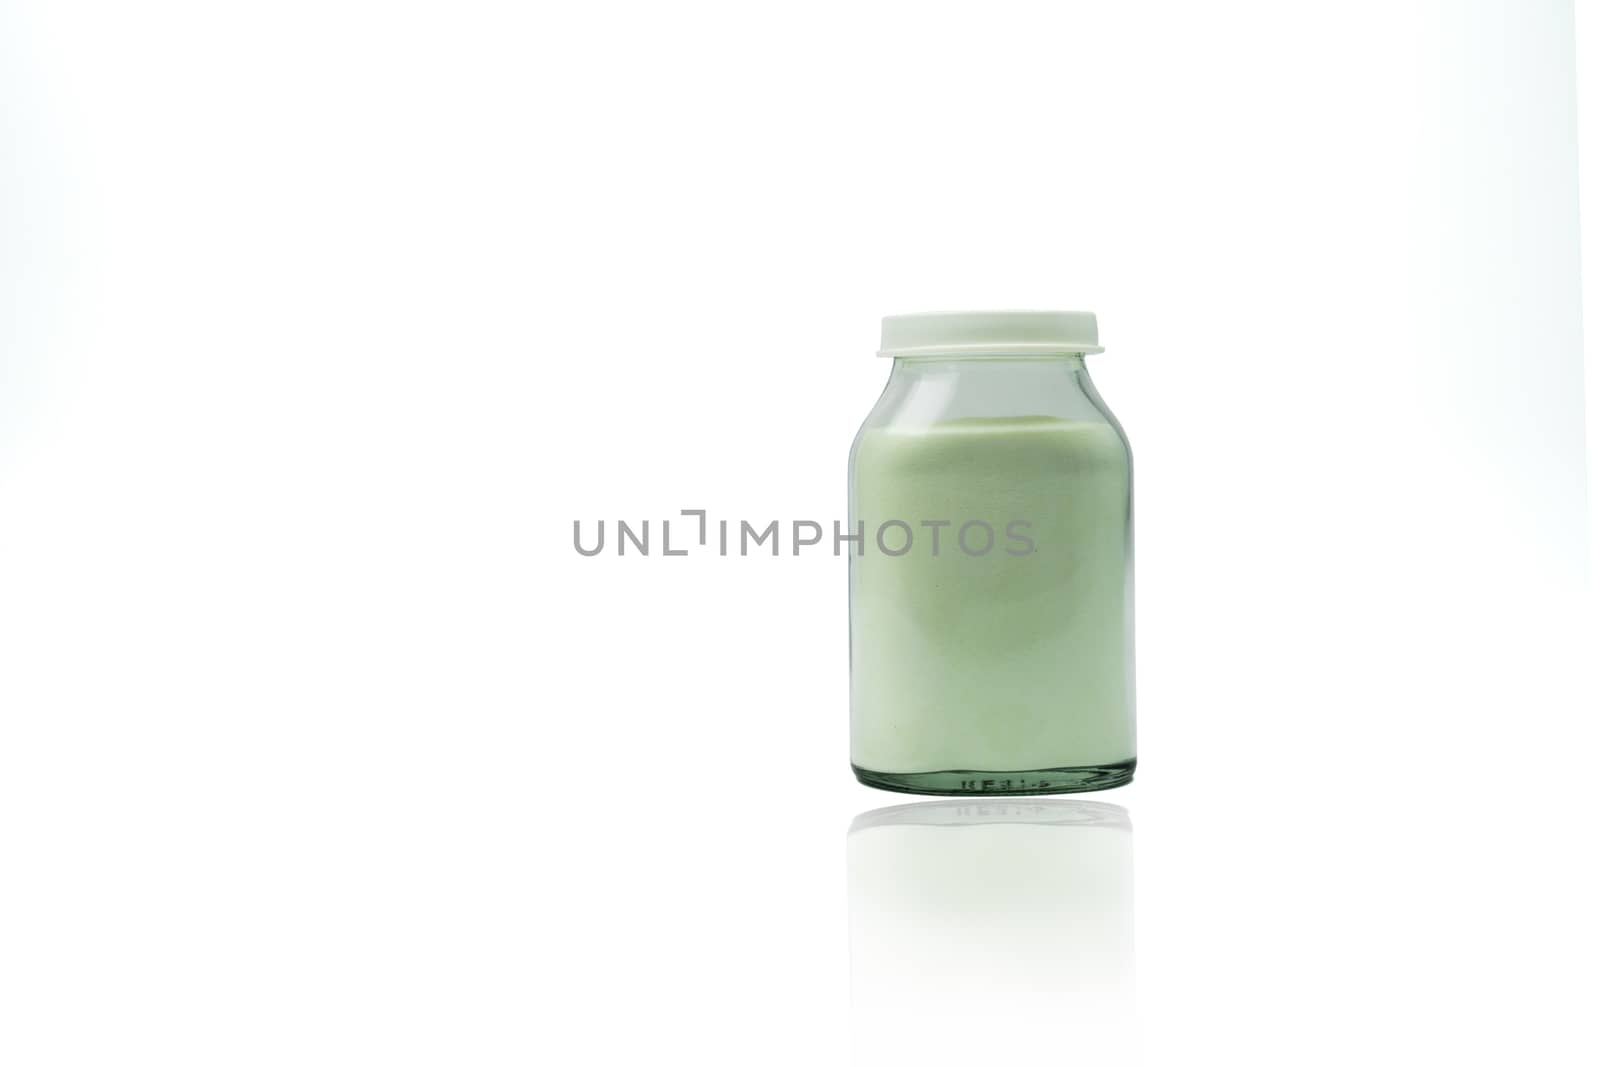 Green lemon flavored effervescent powders in transparent glass bottle with blank label and copy space isolated on white background. Pharmaceutical packaging industry. by Fahroni